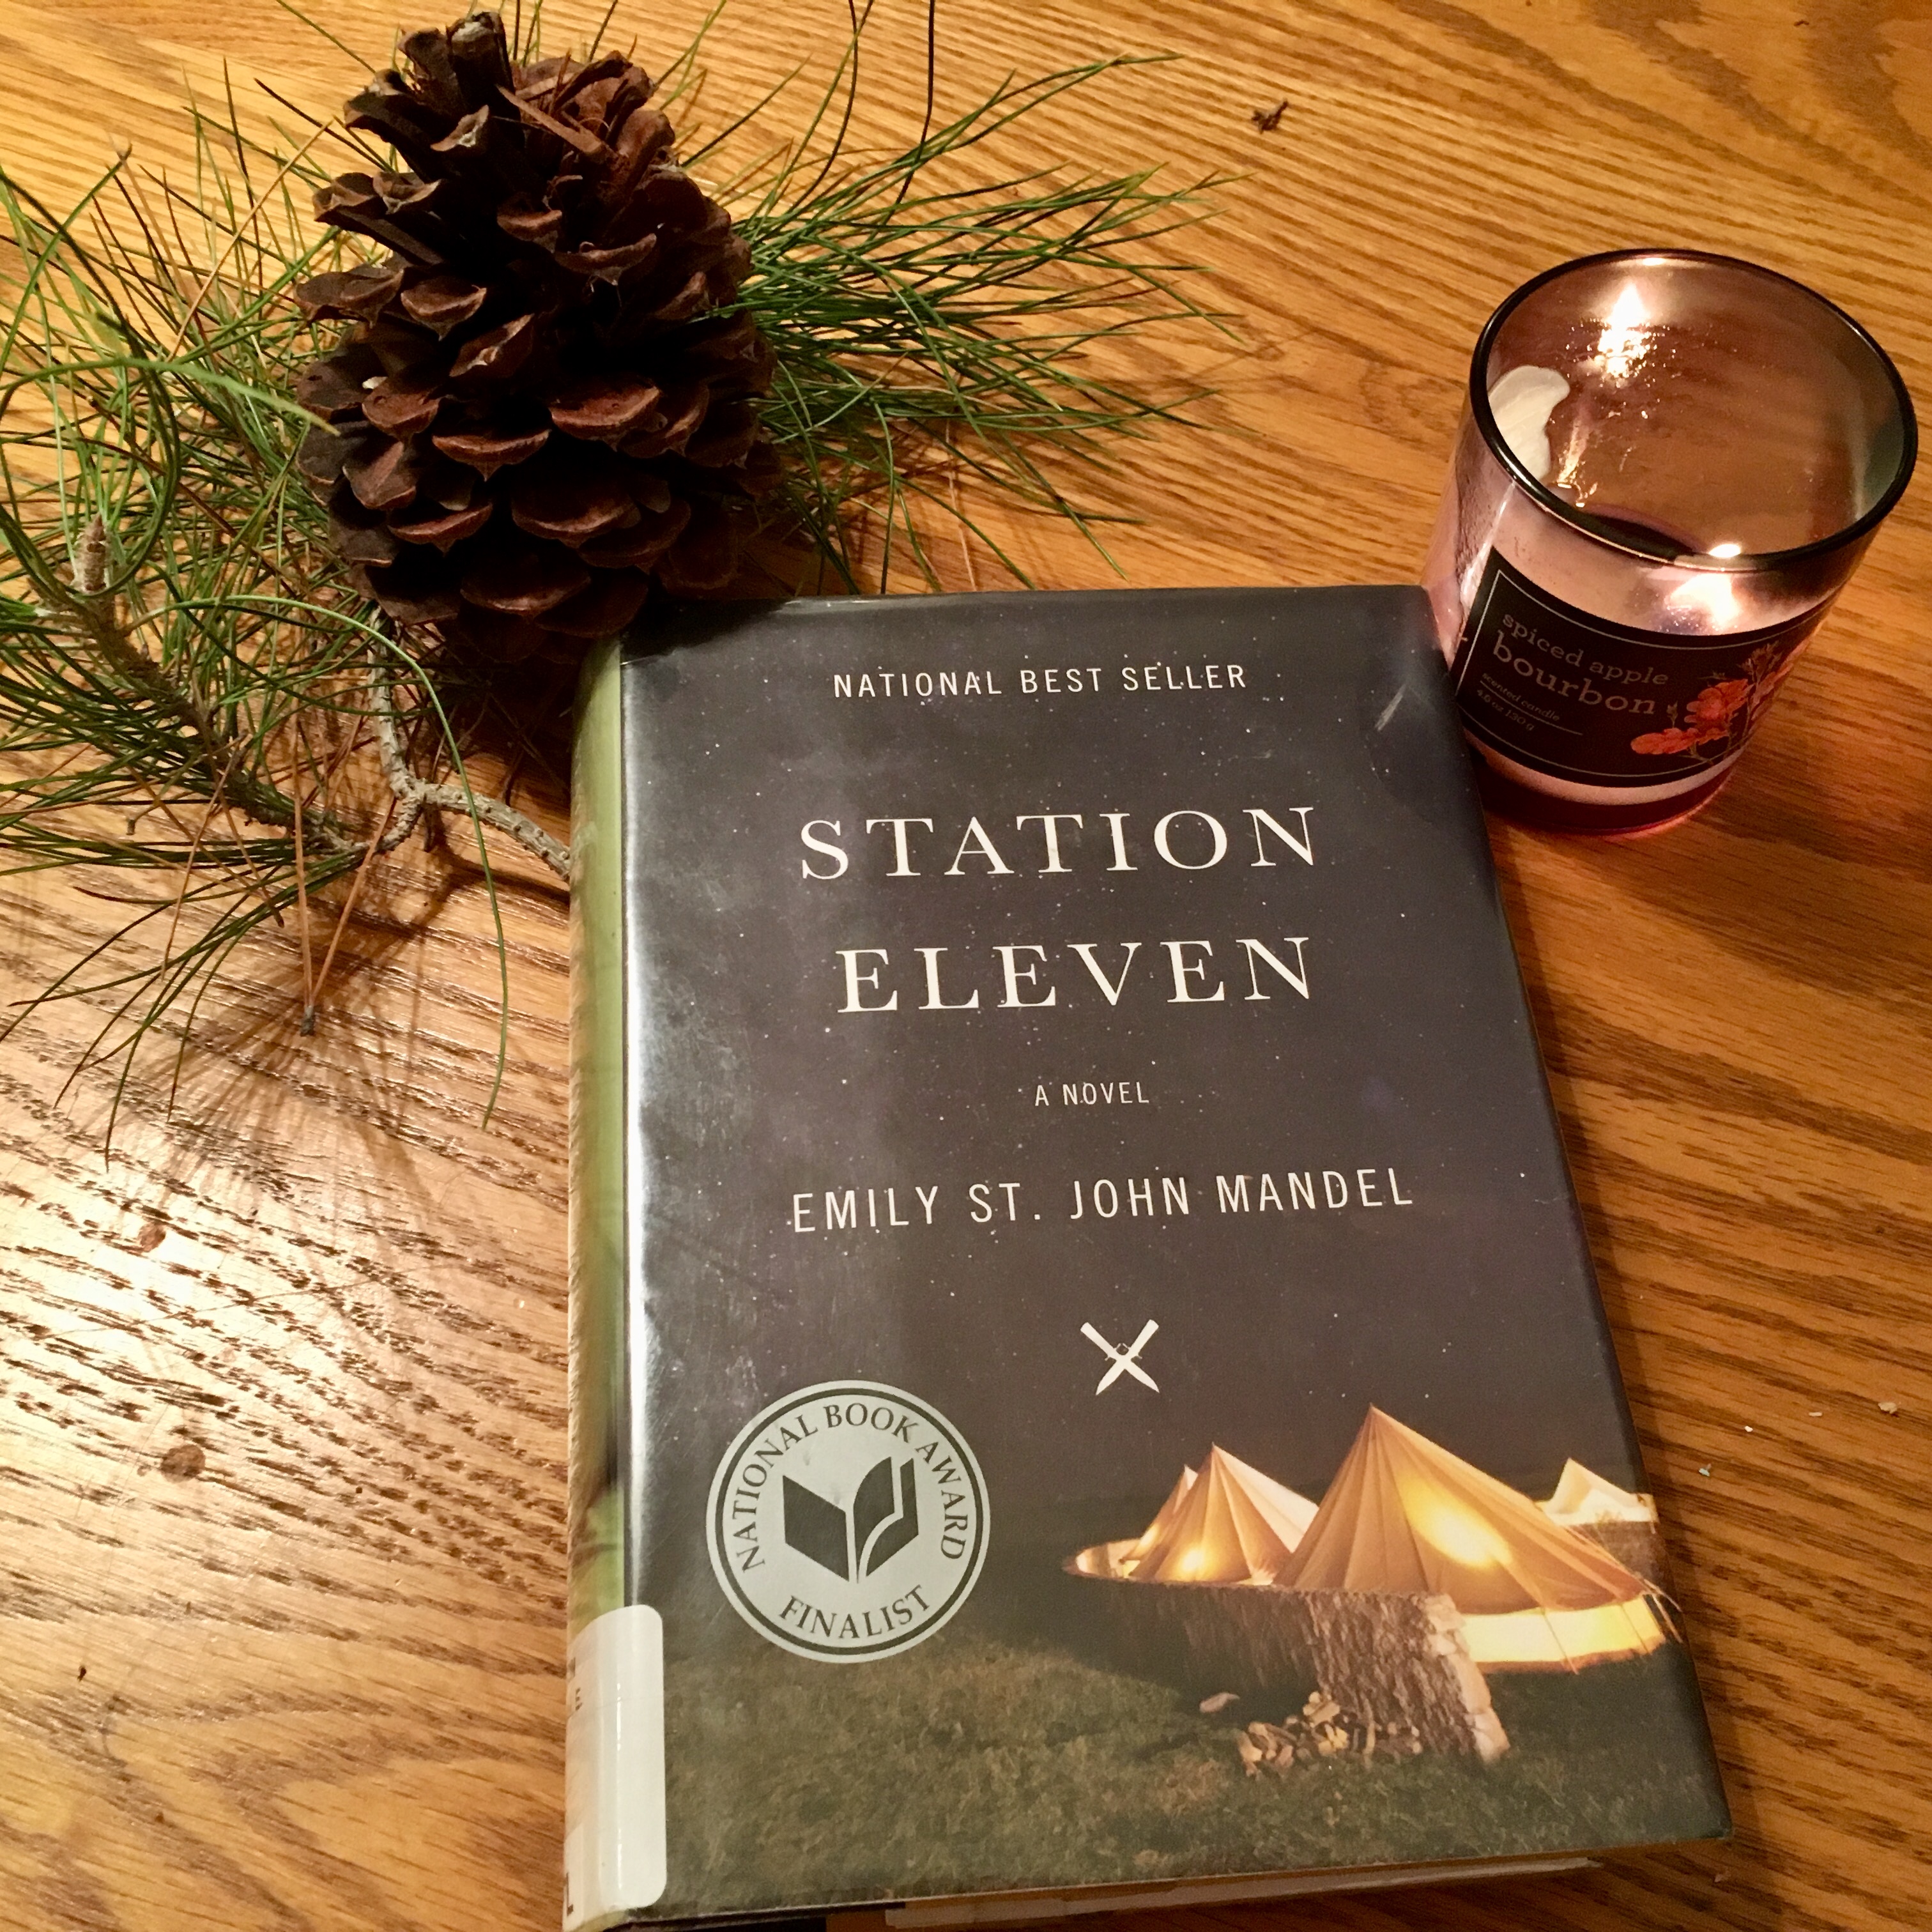 Station Eleven hardback sitting on wood table next to pine needles, a pine cone, and a candle